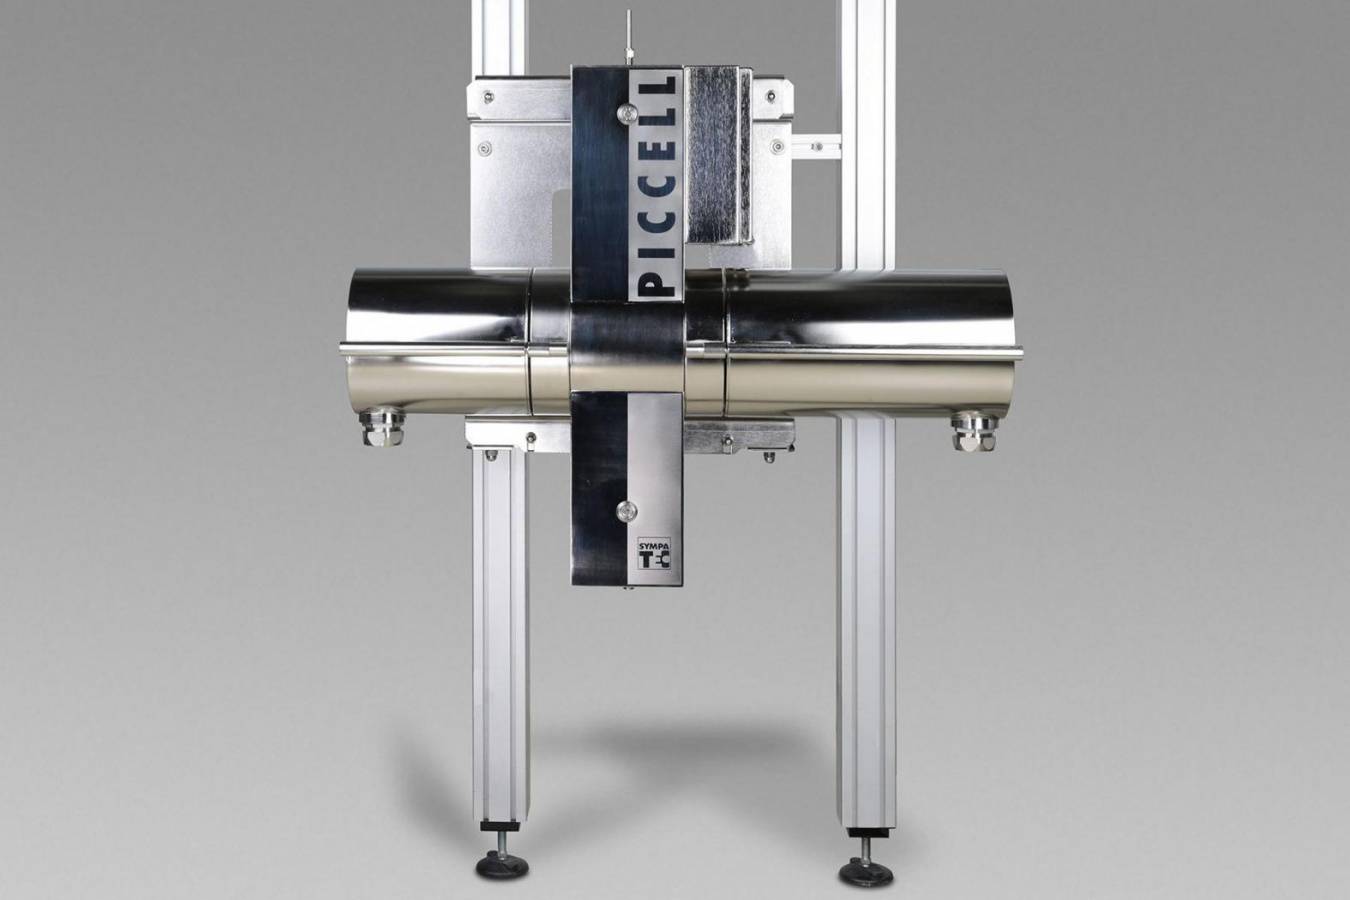 PICCELL with integrated flow-through measurement cell for analysing size and shape of liquid products from 1 µm to 5,000 µm in process environments